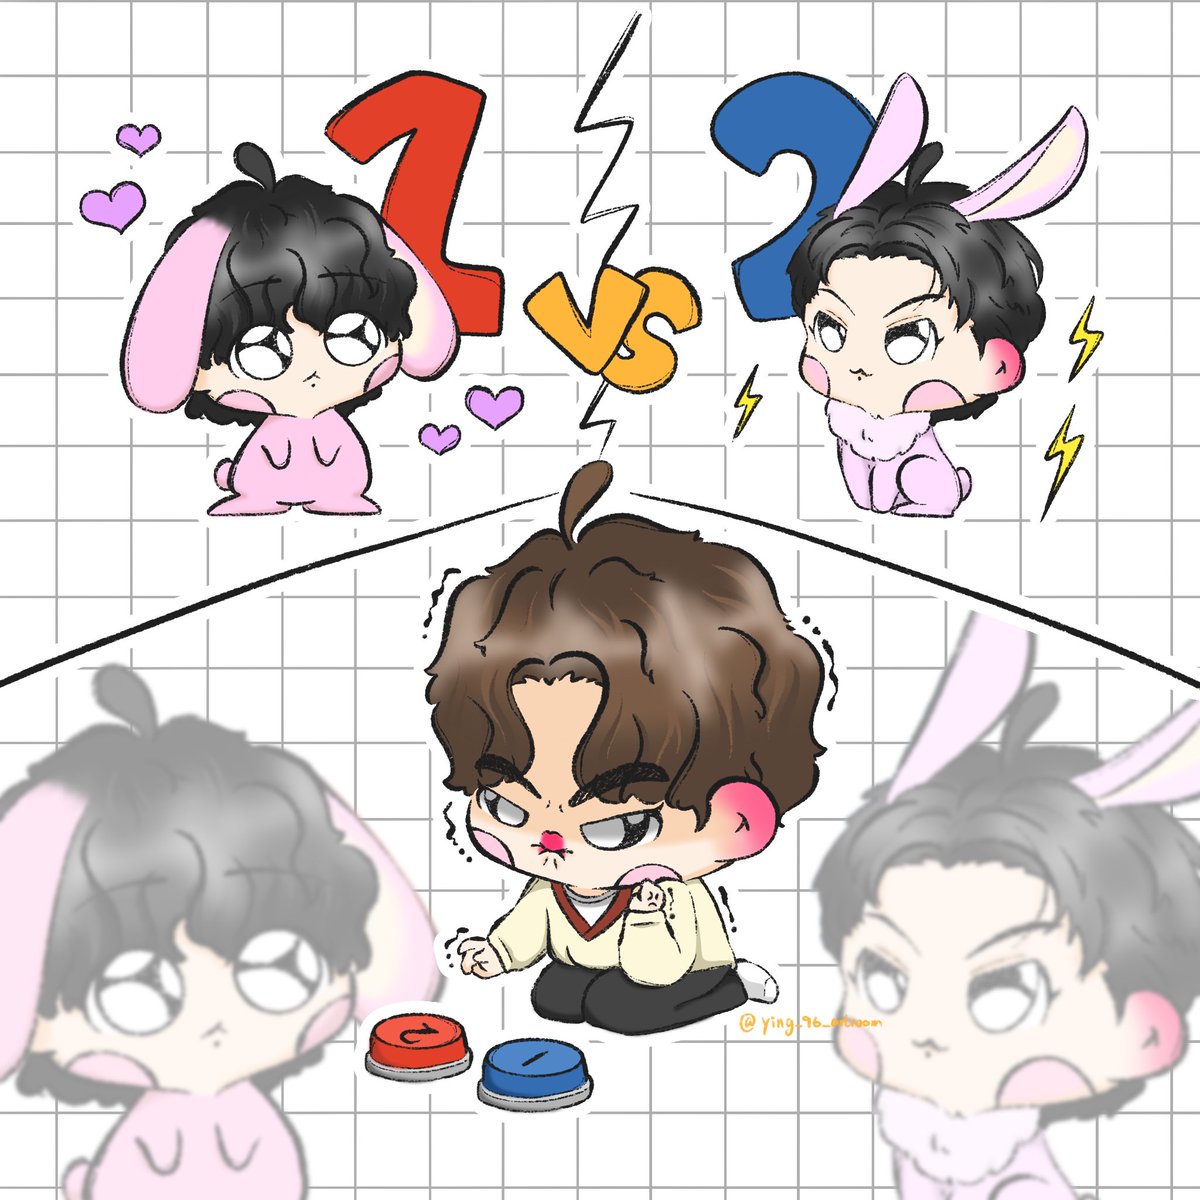 1 or 2??🐹🐭
What is your choice?
Even jin can’t choseㅋㅋㅋㅋ
#bts #btsfanart #jinfanart #jin #jungkook #jinkook #difficultchoice #rabbit